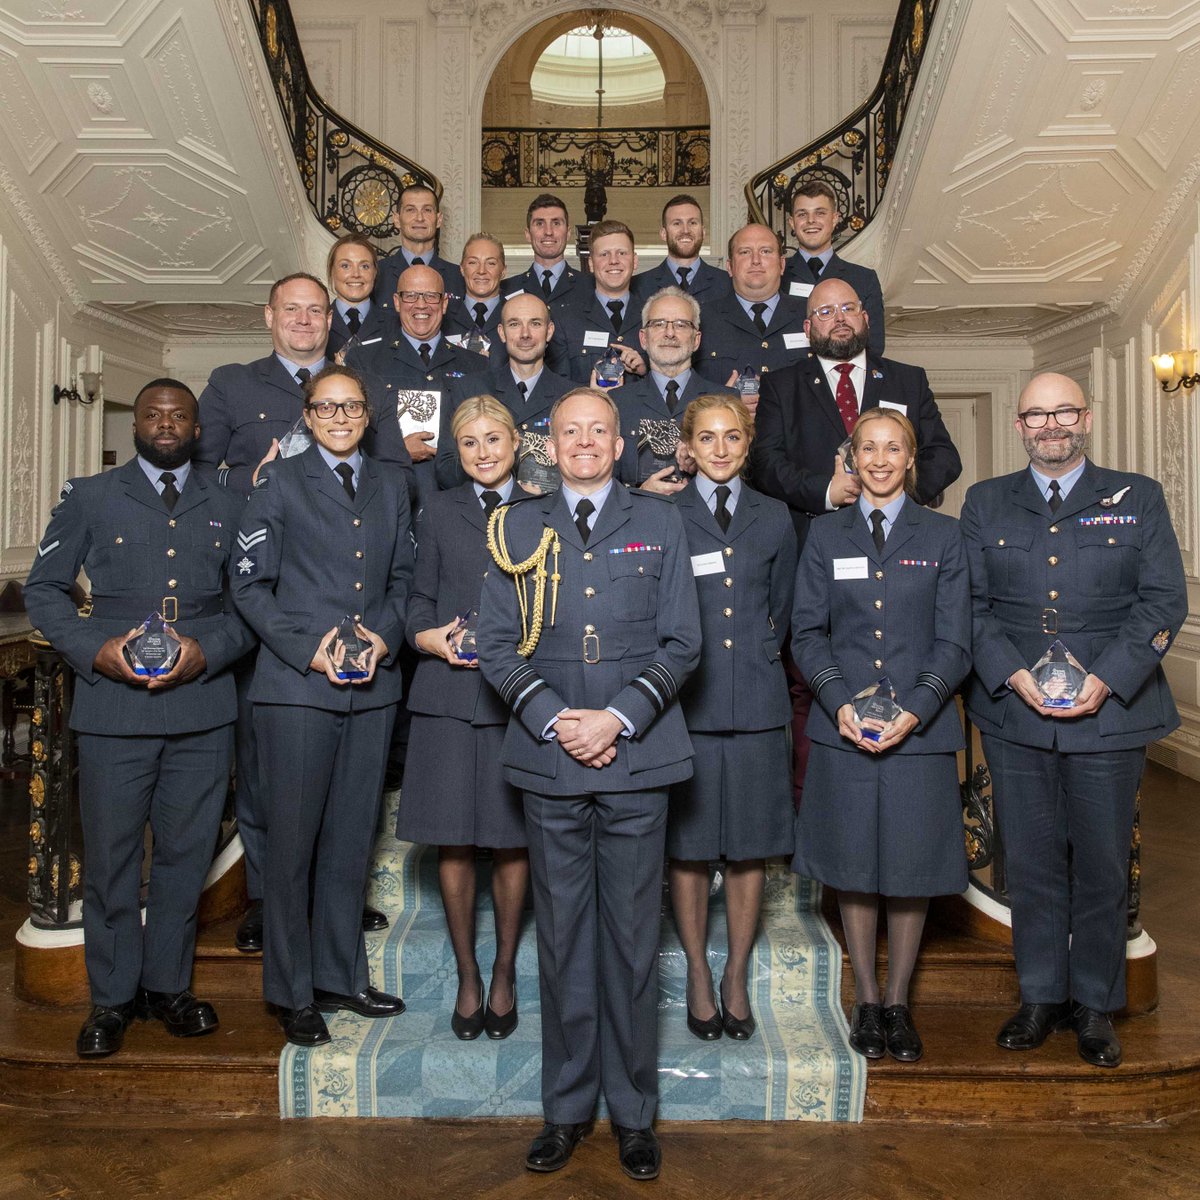 The annual @HQRAFSport Awards have celebrated another year of incredible achievements by individuals, teams, officials, and administrators. For the complete list of winners and their accomplishments, click here: bit.ly/3sqM0D4